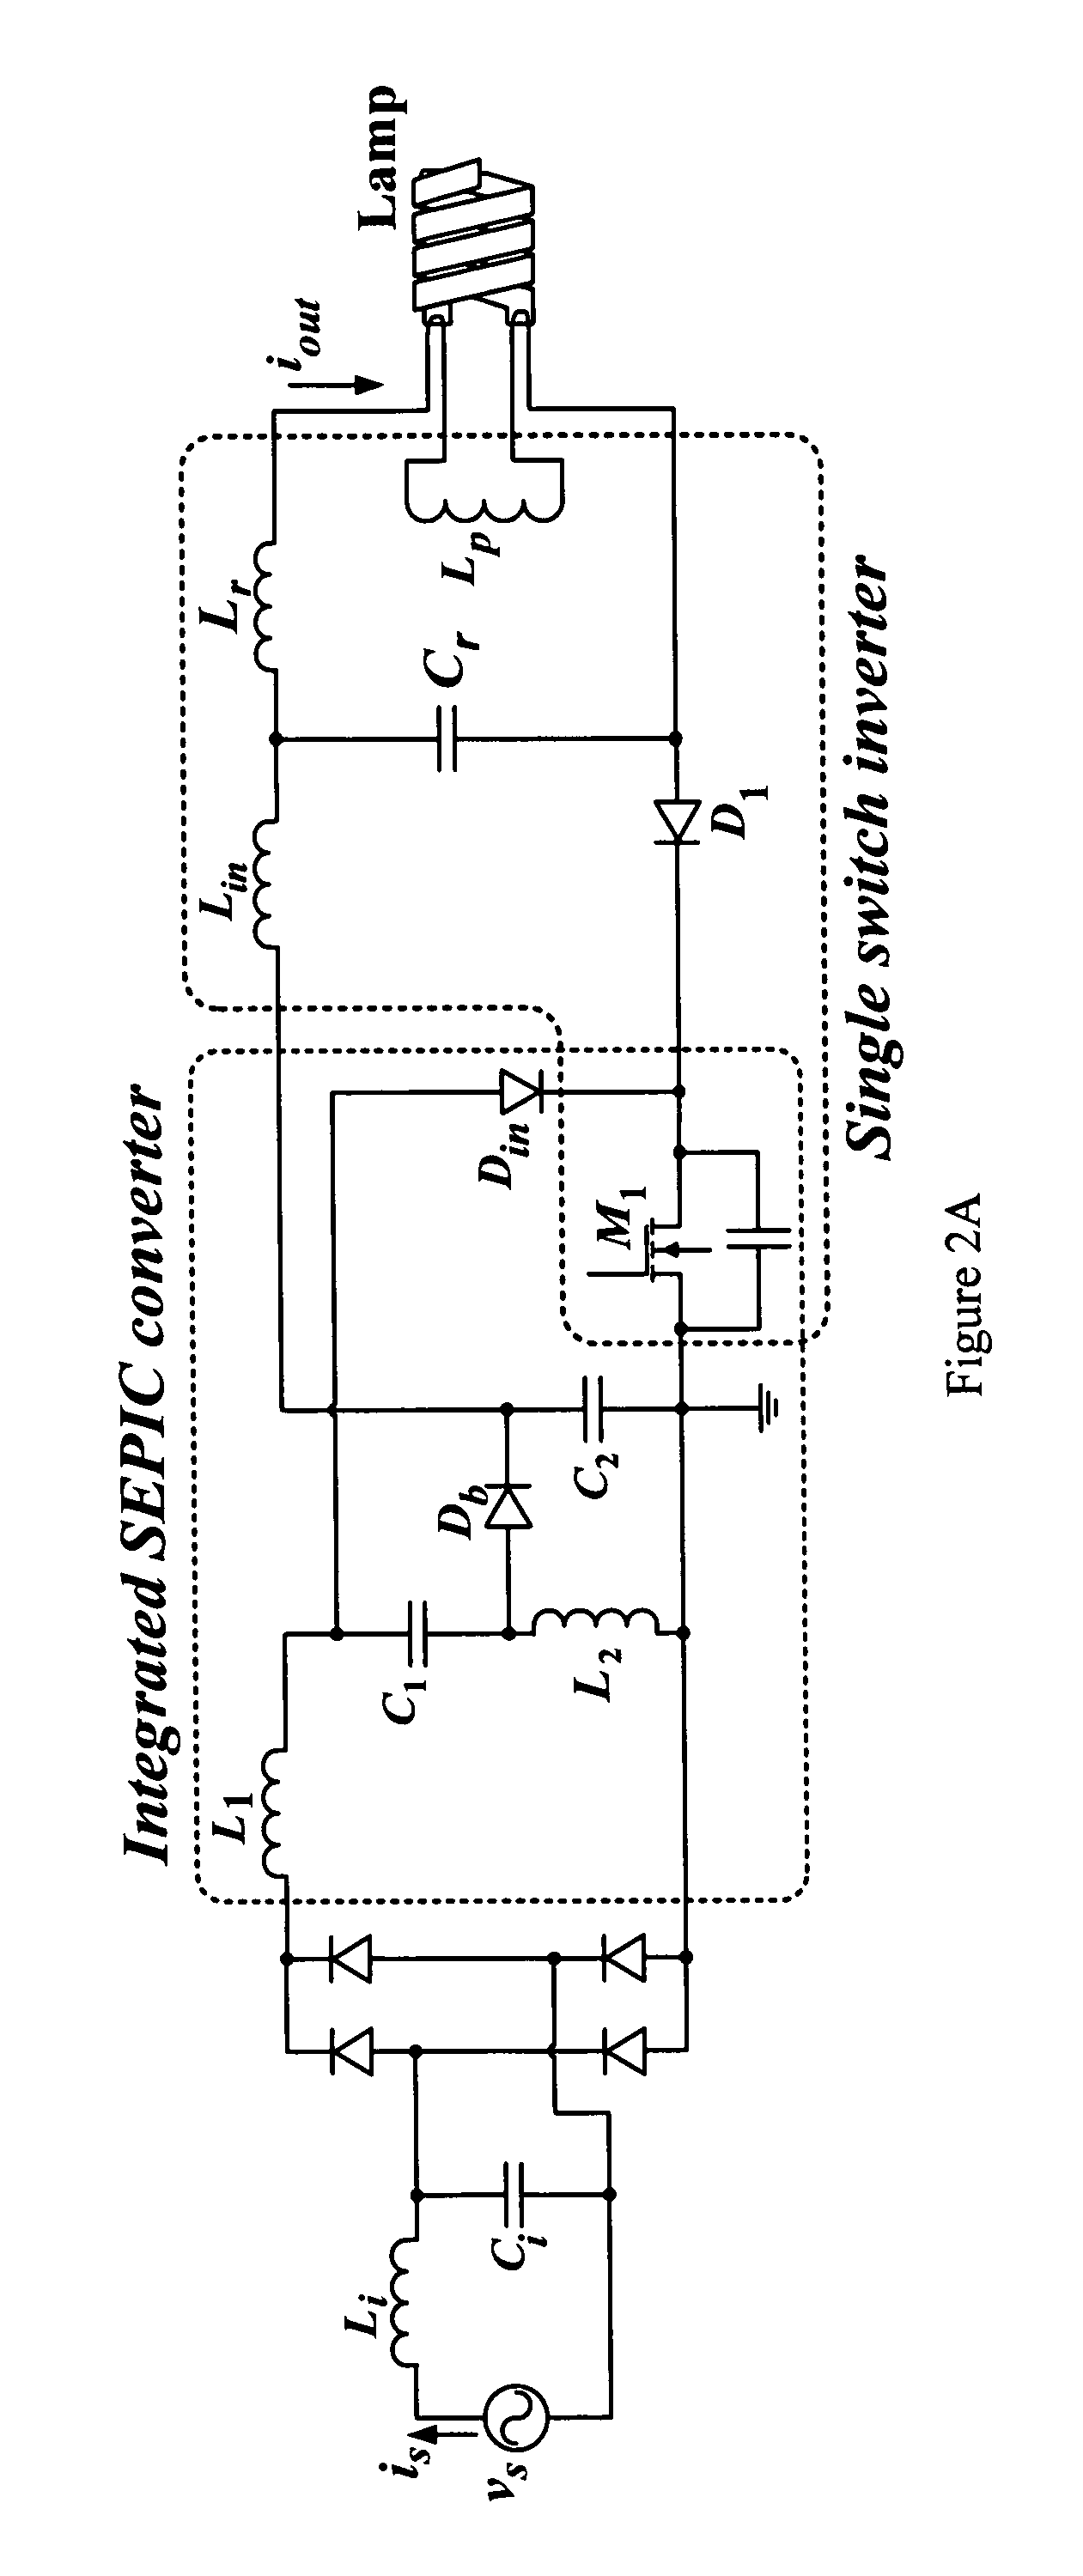 Electronic ballast with high power factor